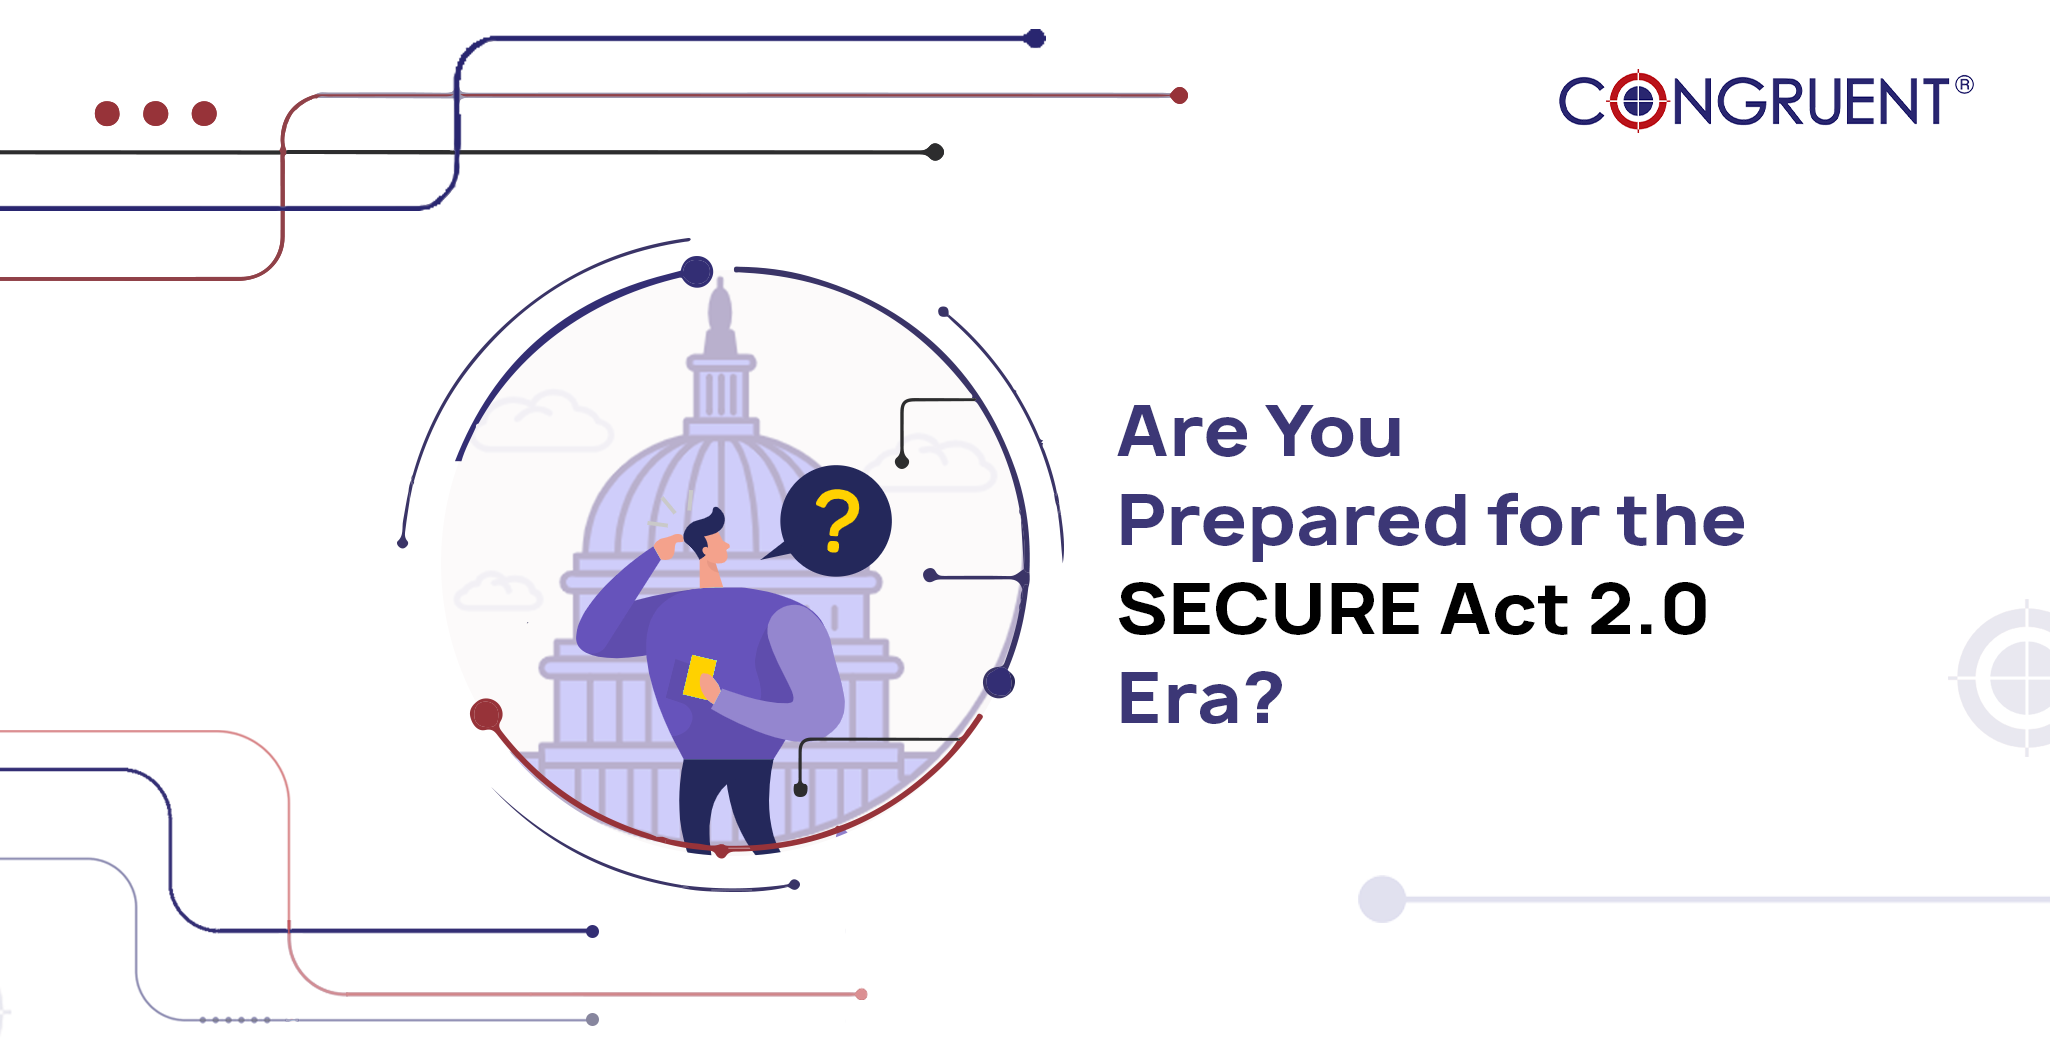 Are You Prepared for the SECURE Act 2.0 Era?